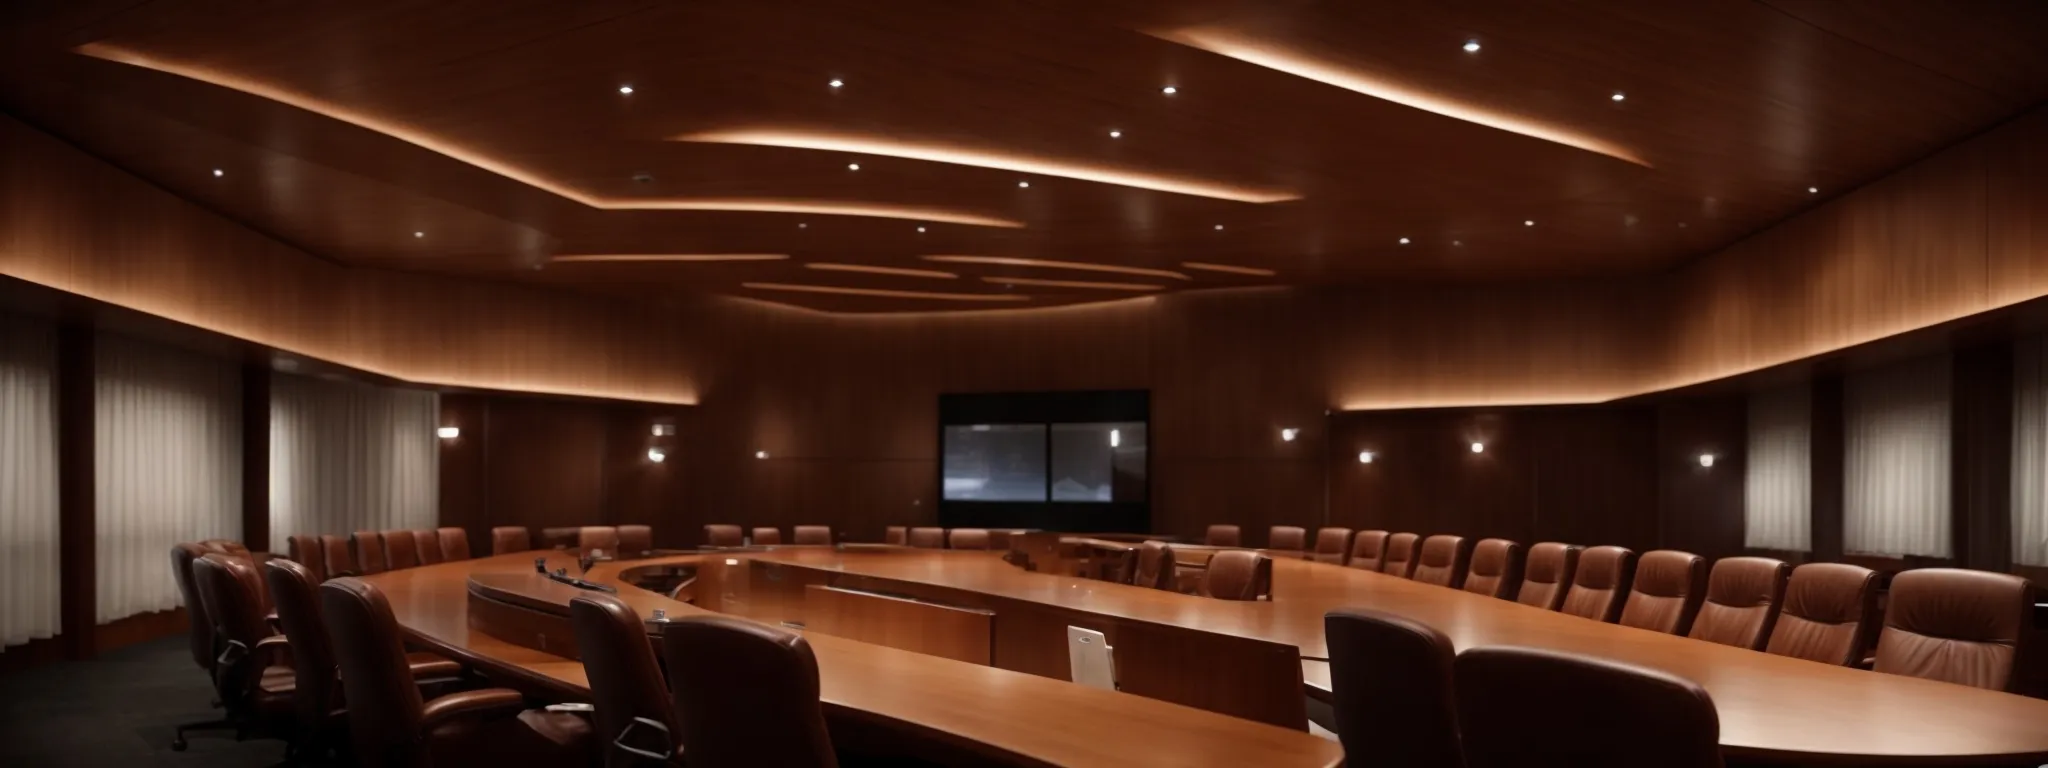 a sophisticated conference room with a large wooden table, surrounded by empty leather chairs, under the soft glow of overhead lights, waiting to host its next arbitral tribunal.